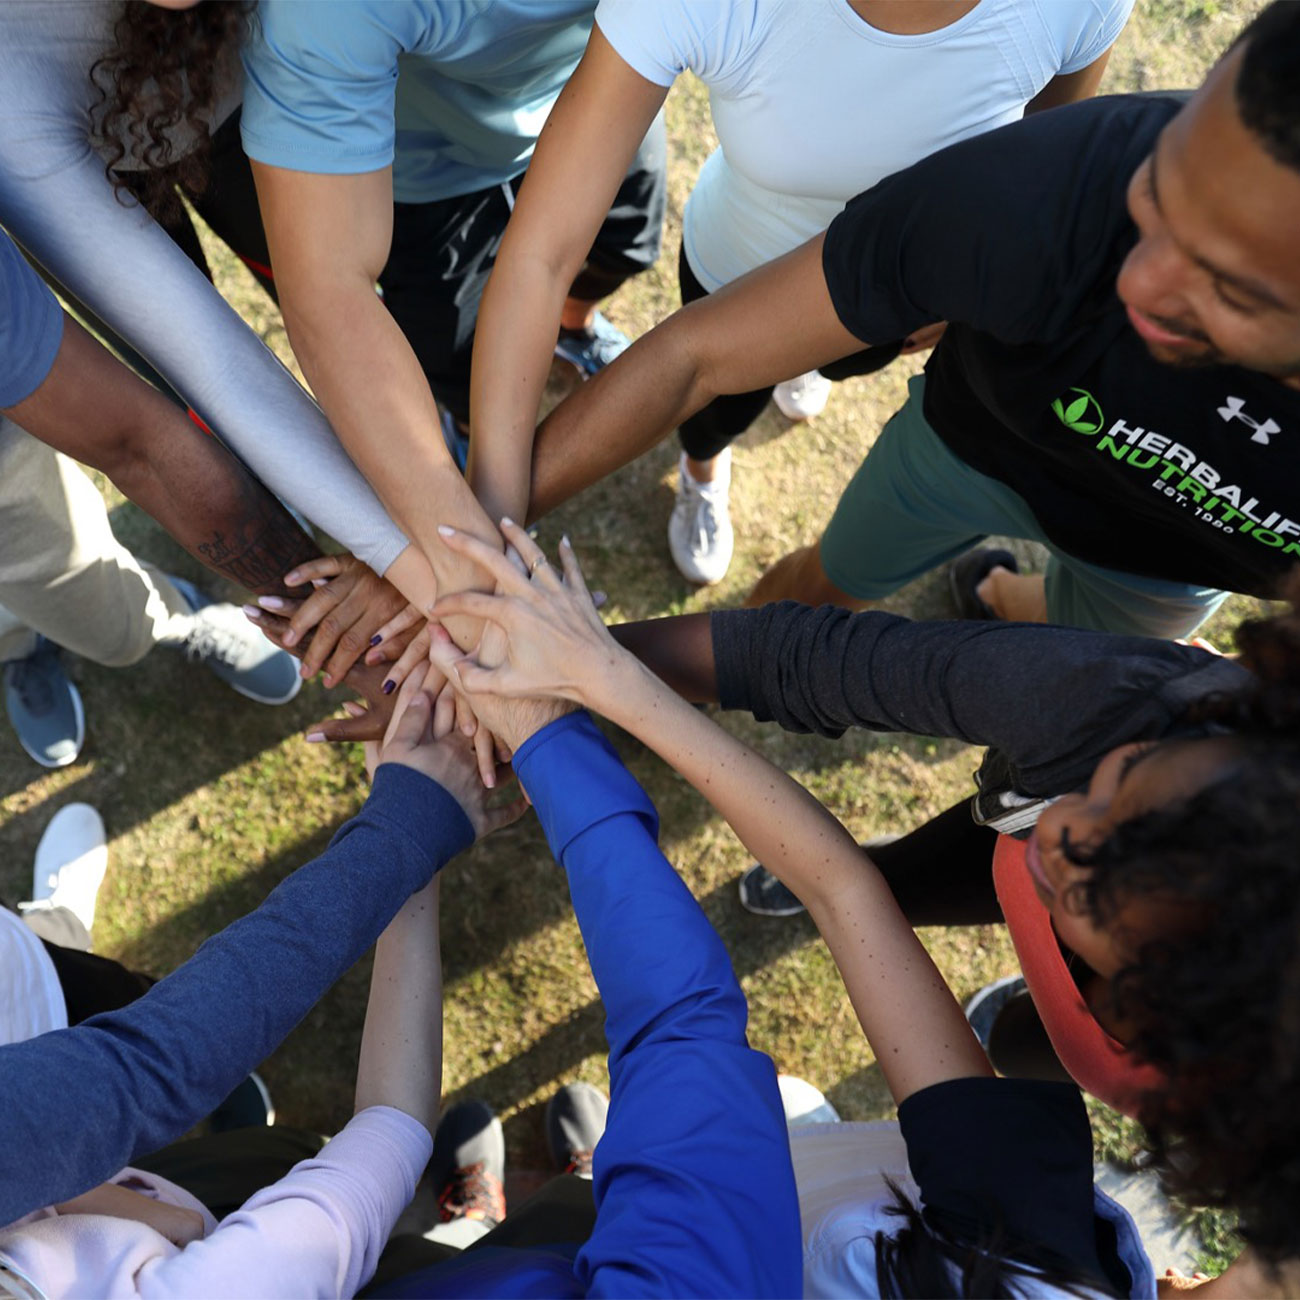 Group of Herbalife Nutrition members joining hands in a circle and smiling